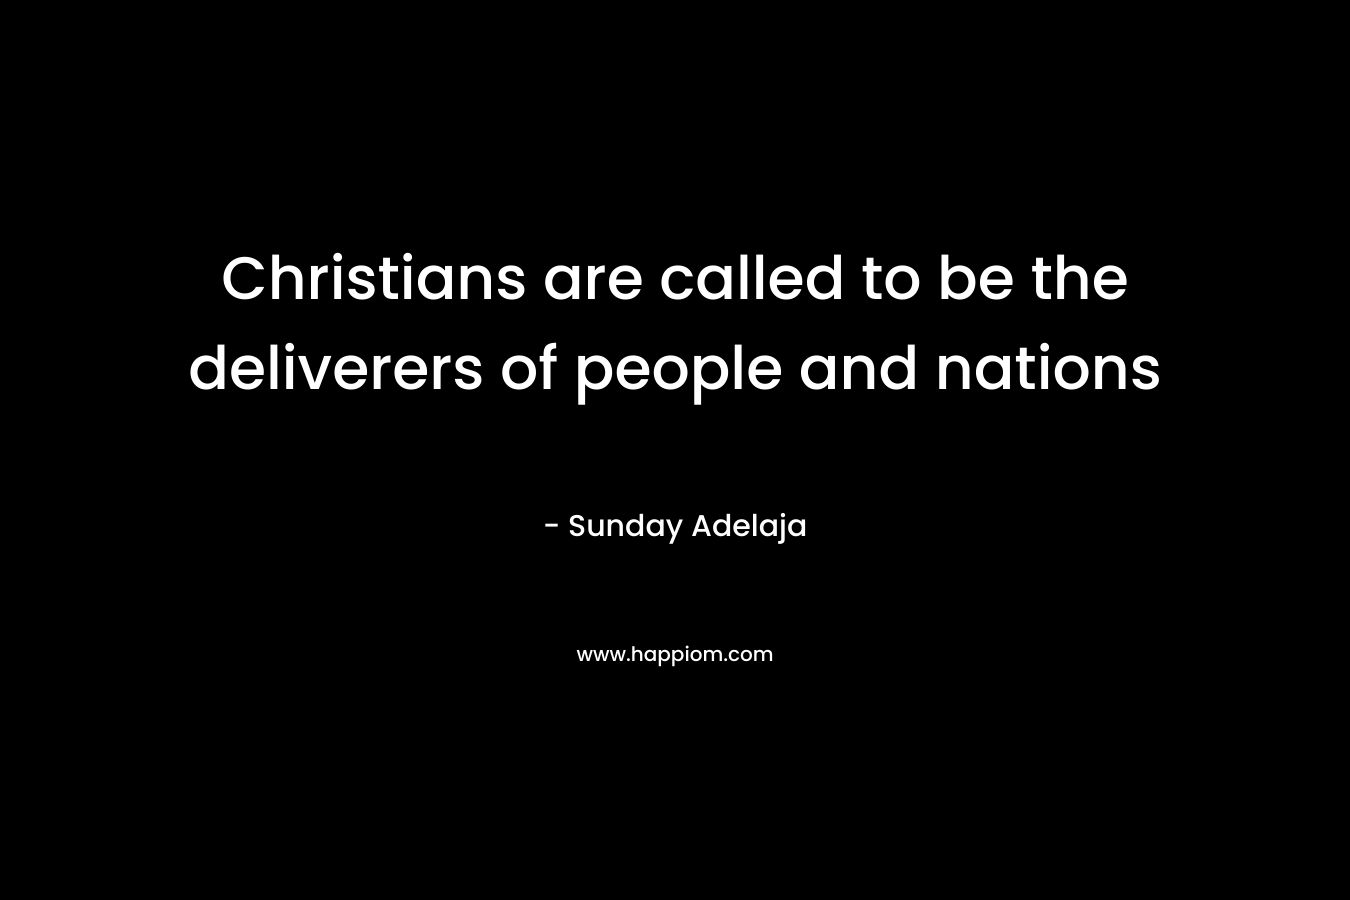 Christians are called to be the deliverers of people and nations